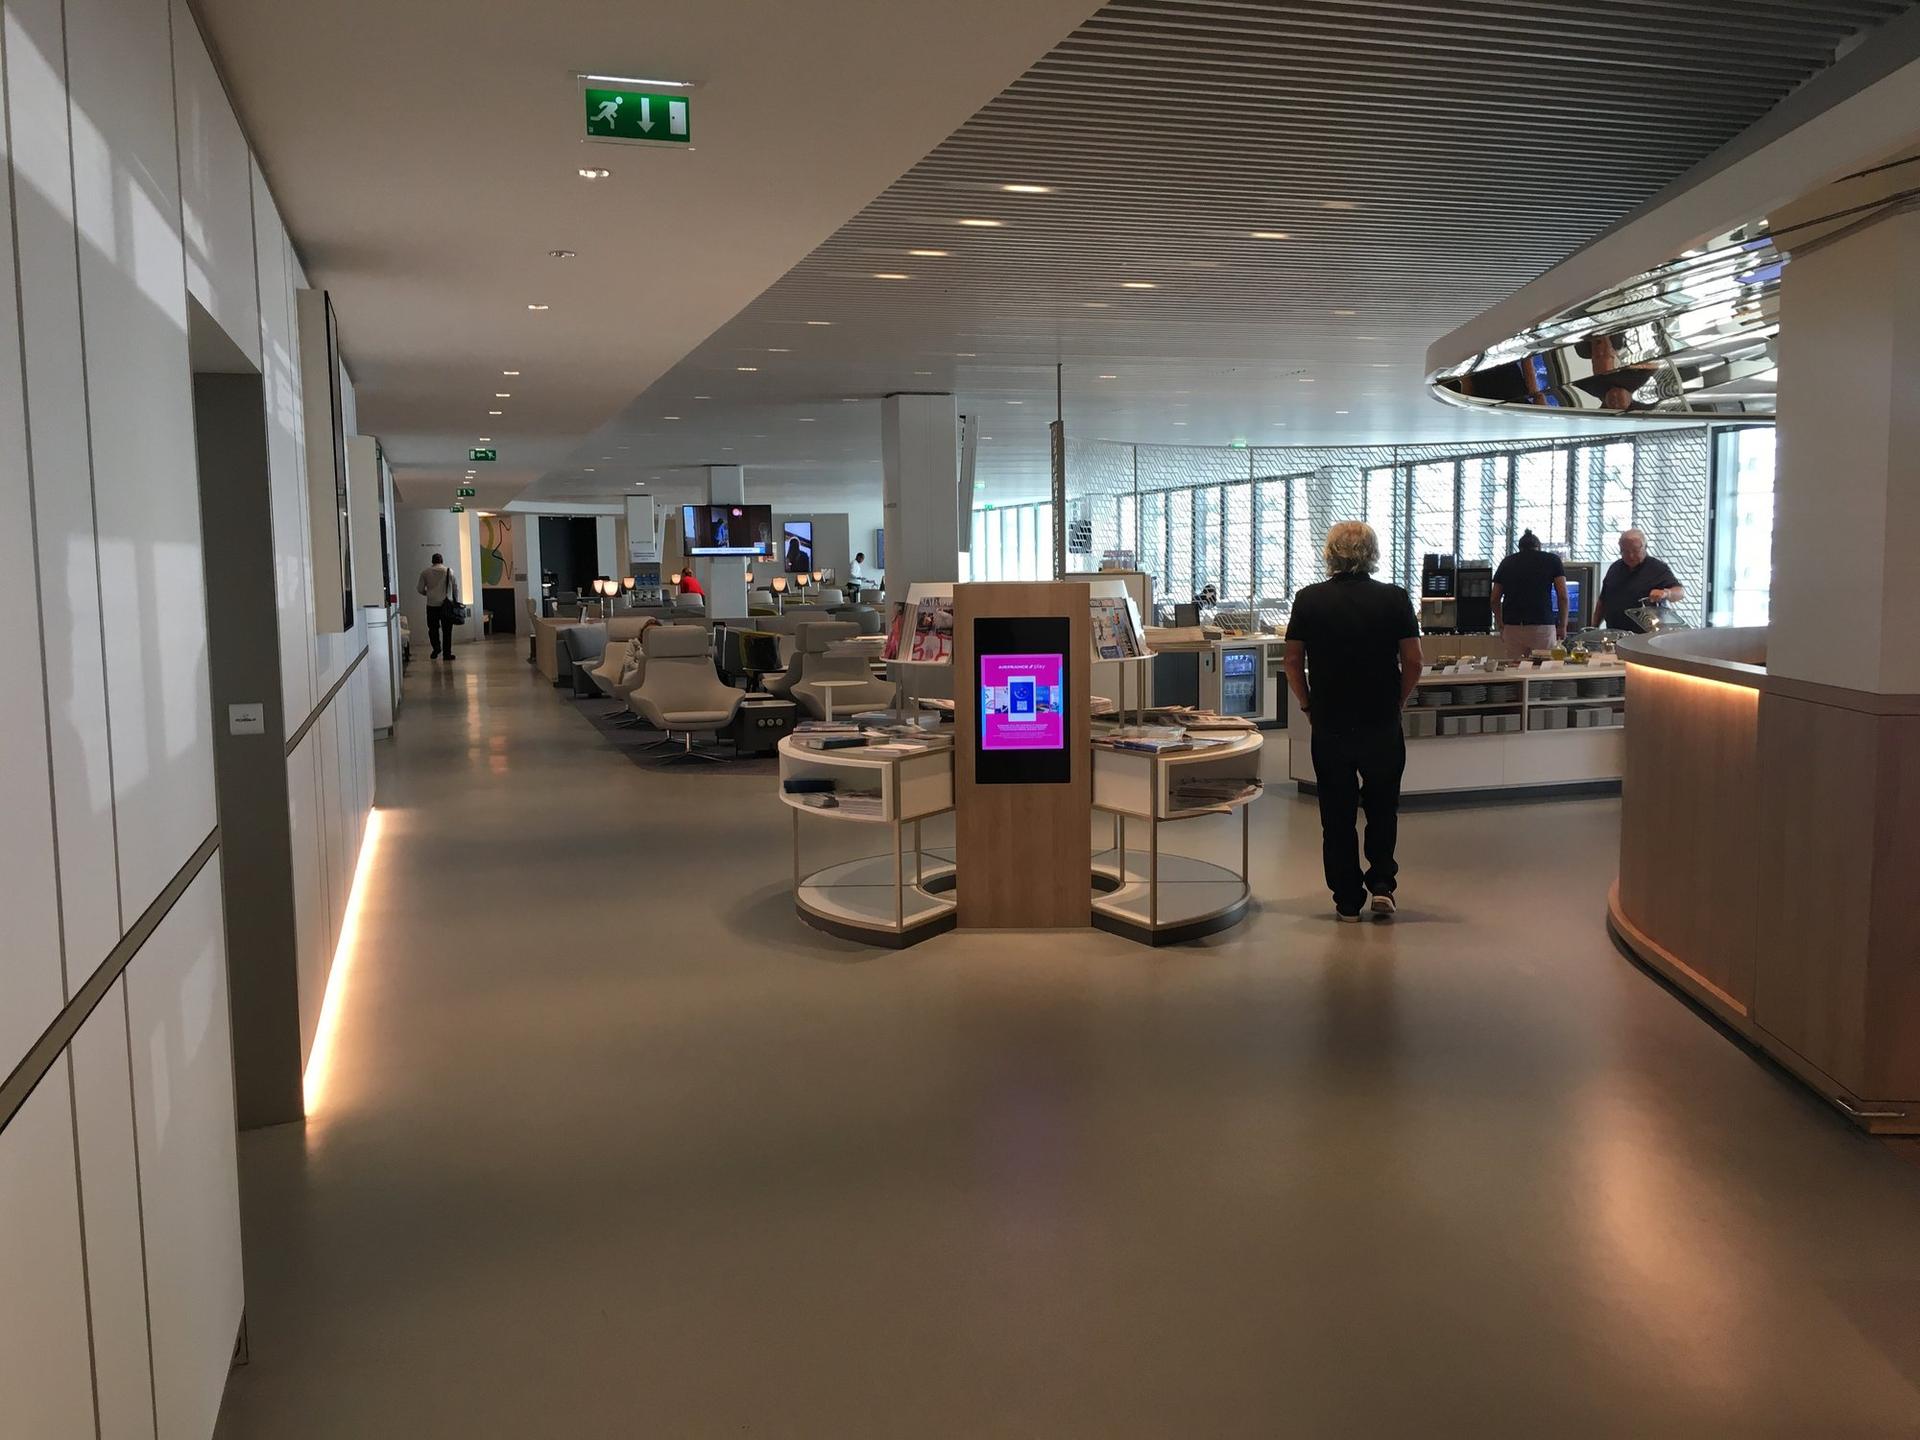 Air France Lounge (Concourse L) image 56 of 57